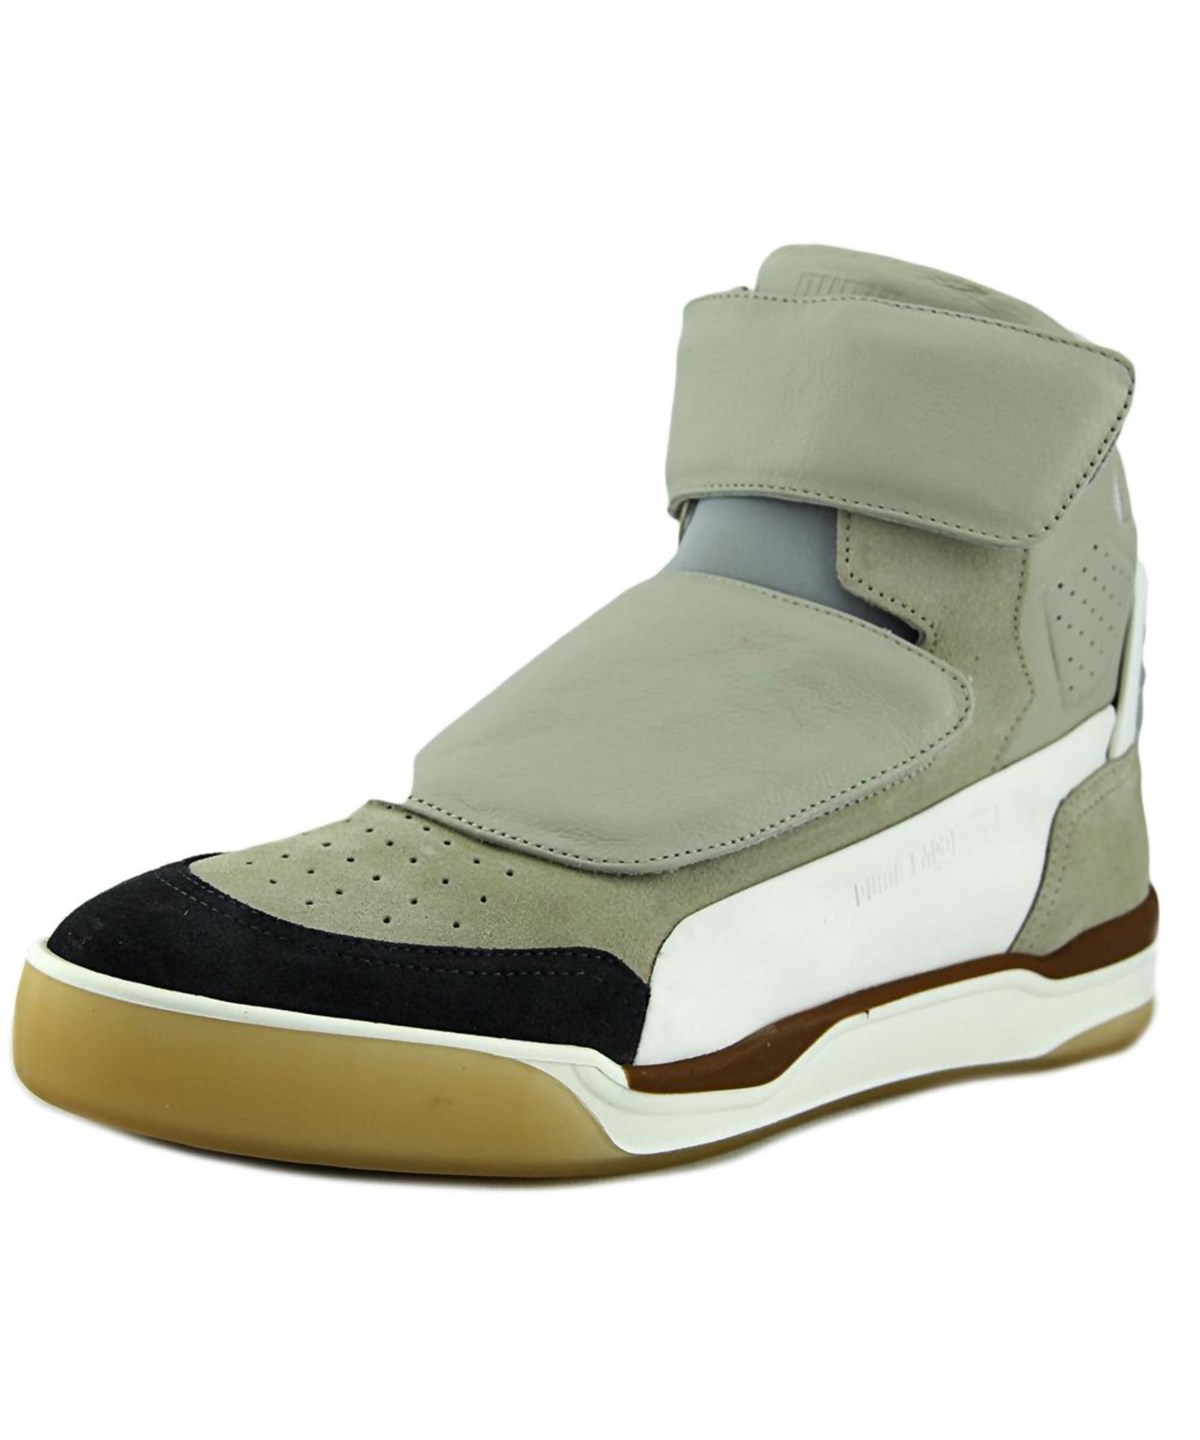 Mcq Move Mid Round Toe Leather Sneakers 